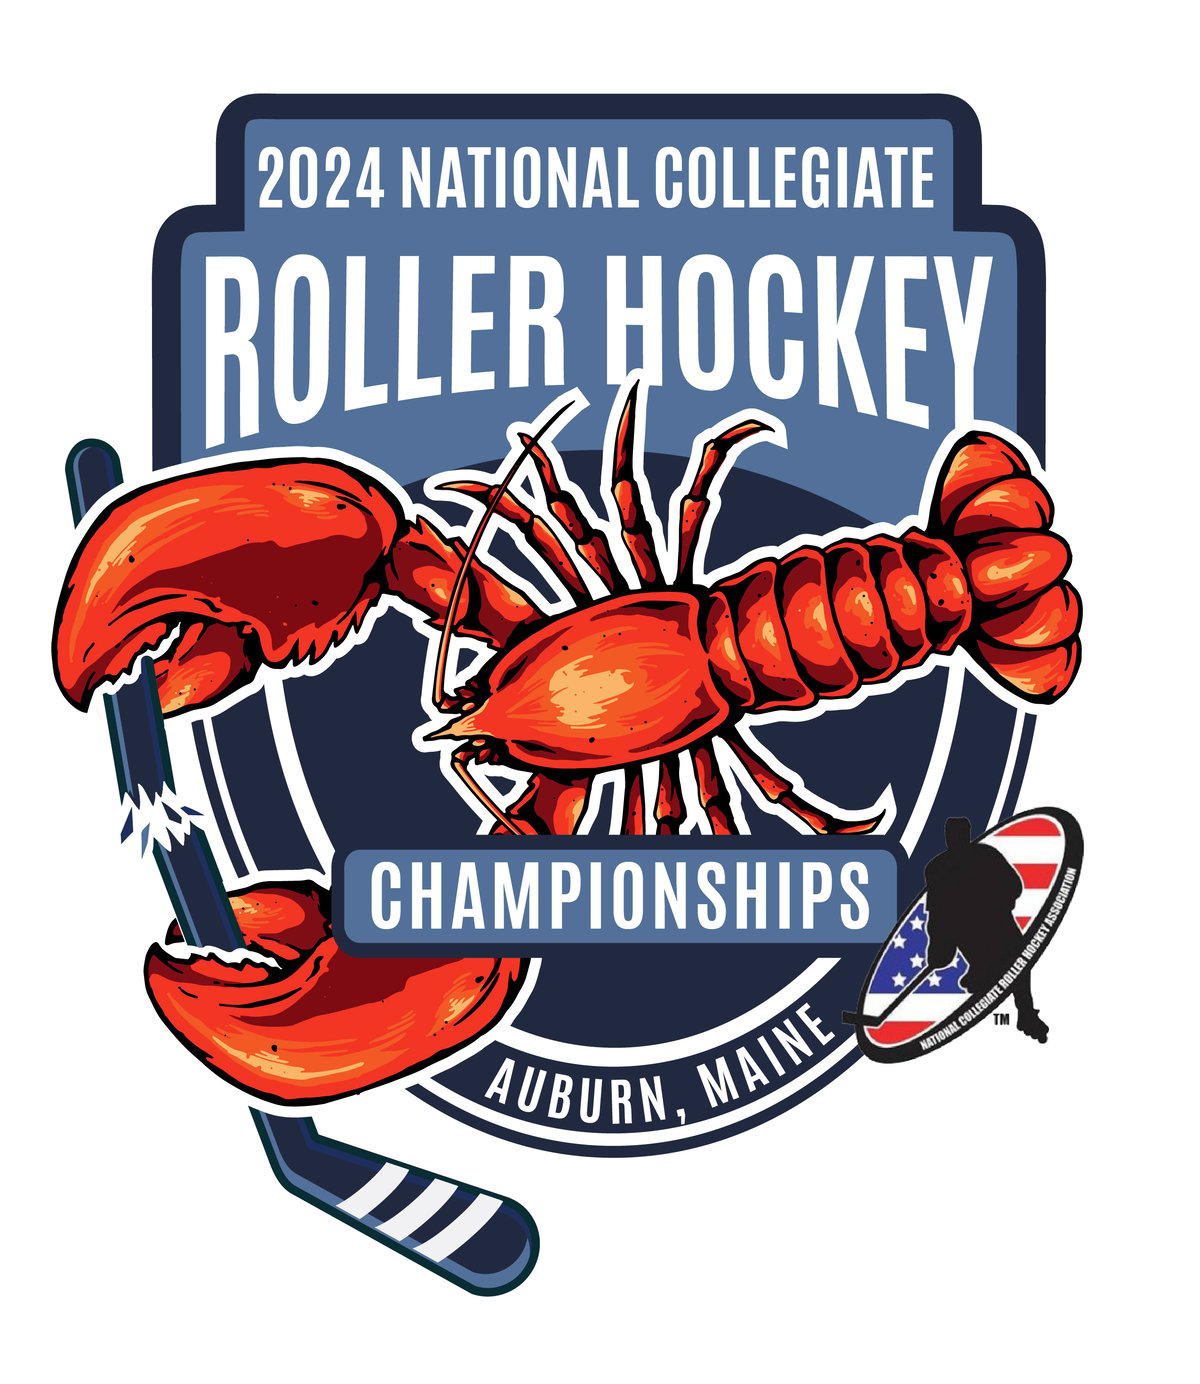 The Puck Drops Today for the 2024 National Collegiate Roller Hockey Championships